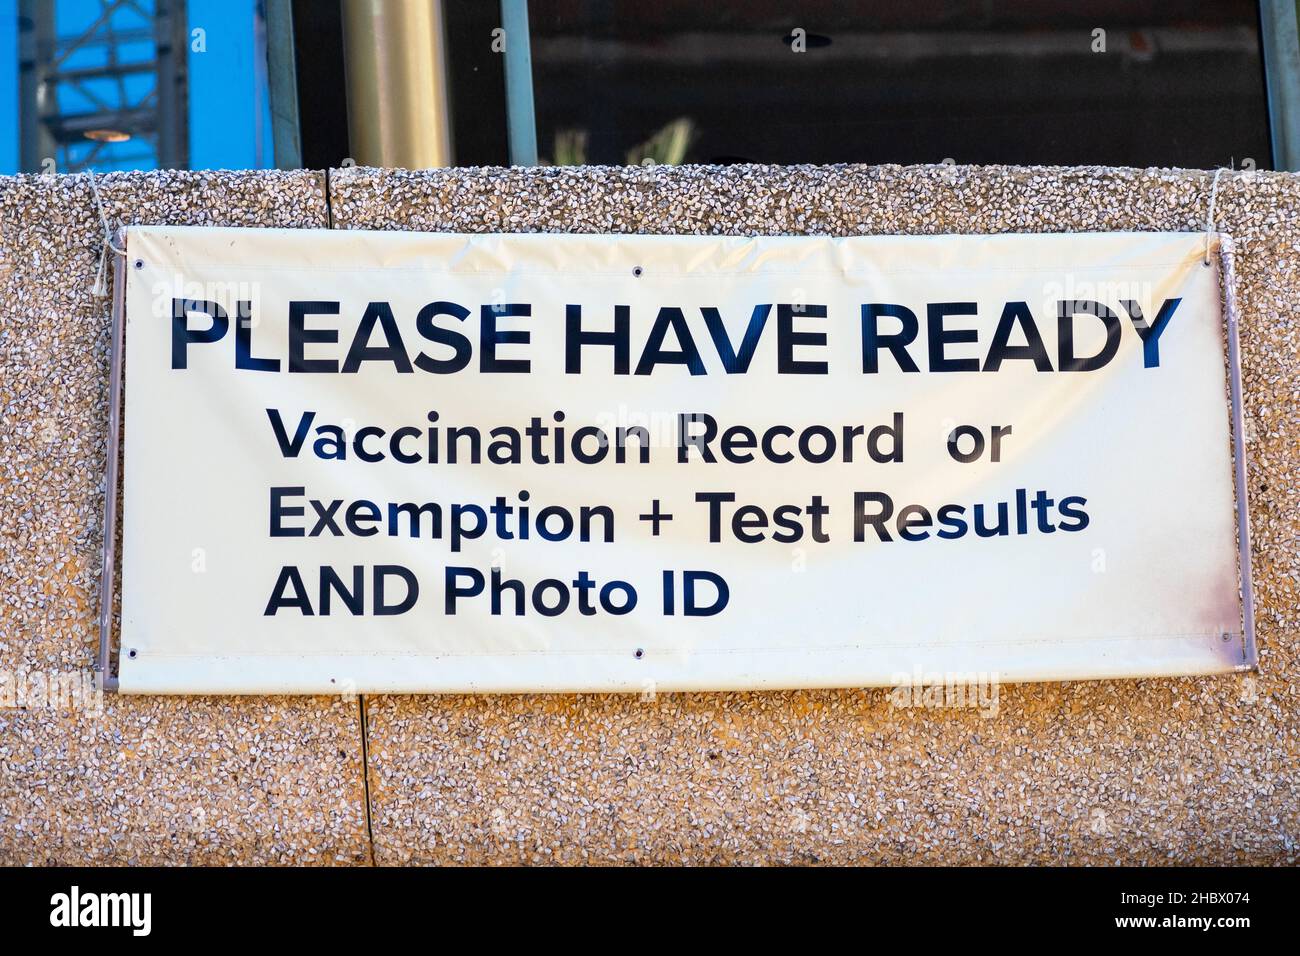 Covid-19 vaccination record or exemption and test results sign at the entrance to concert or stadium as a requirements to attend indoor public event Stock Photo